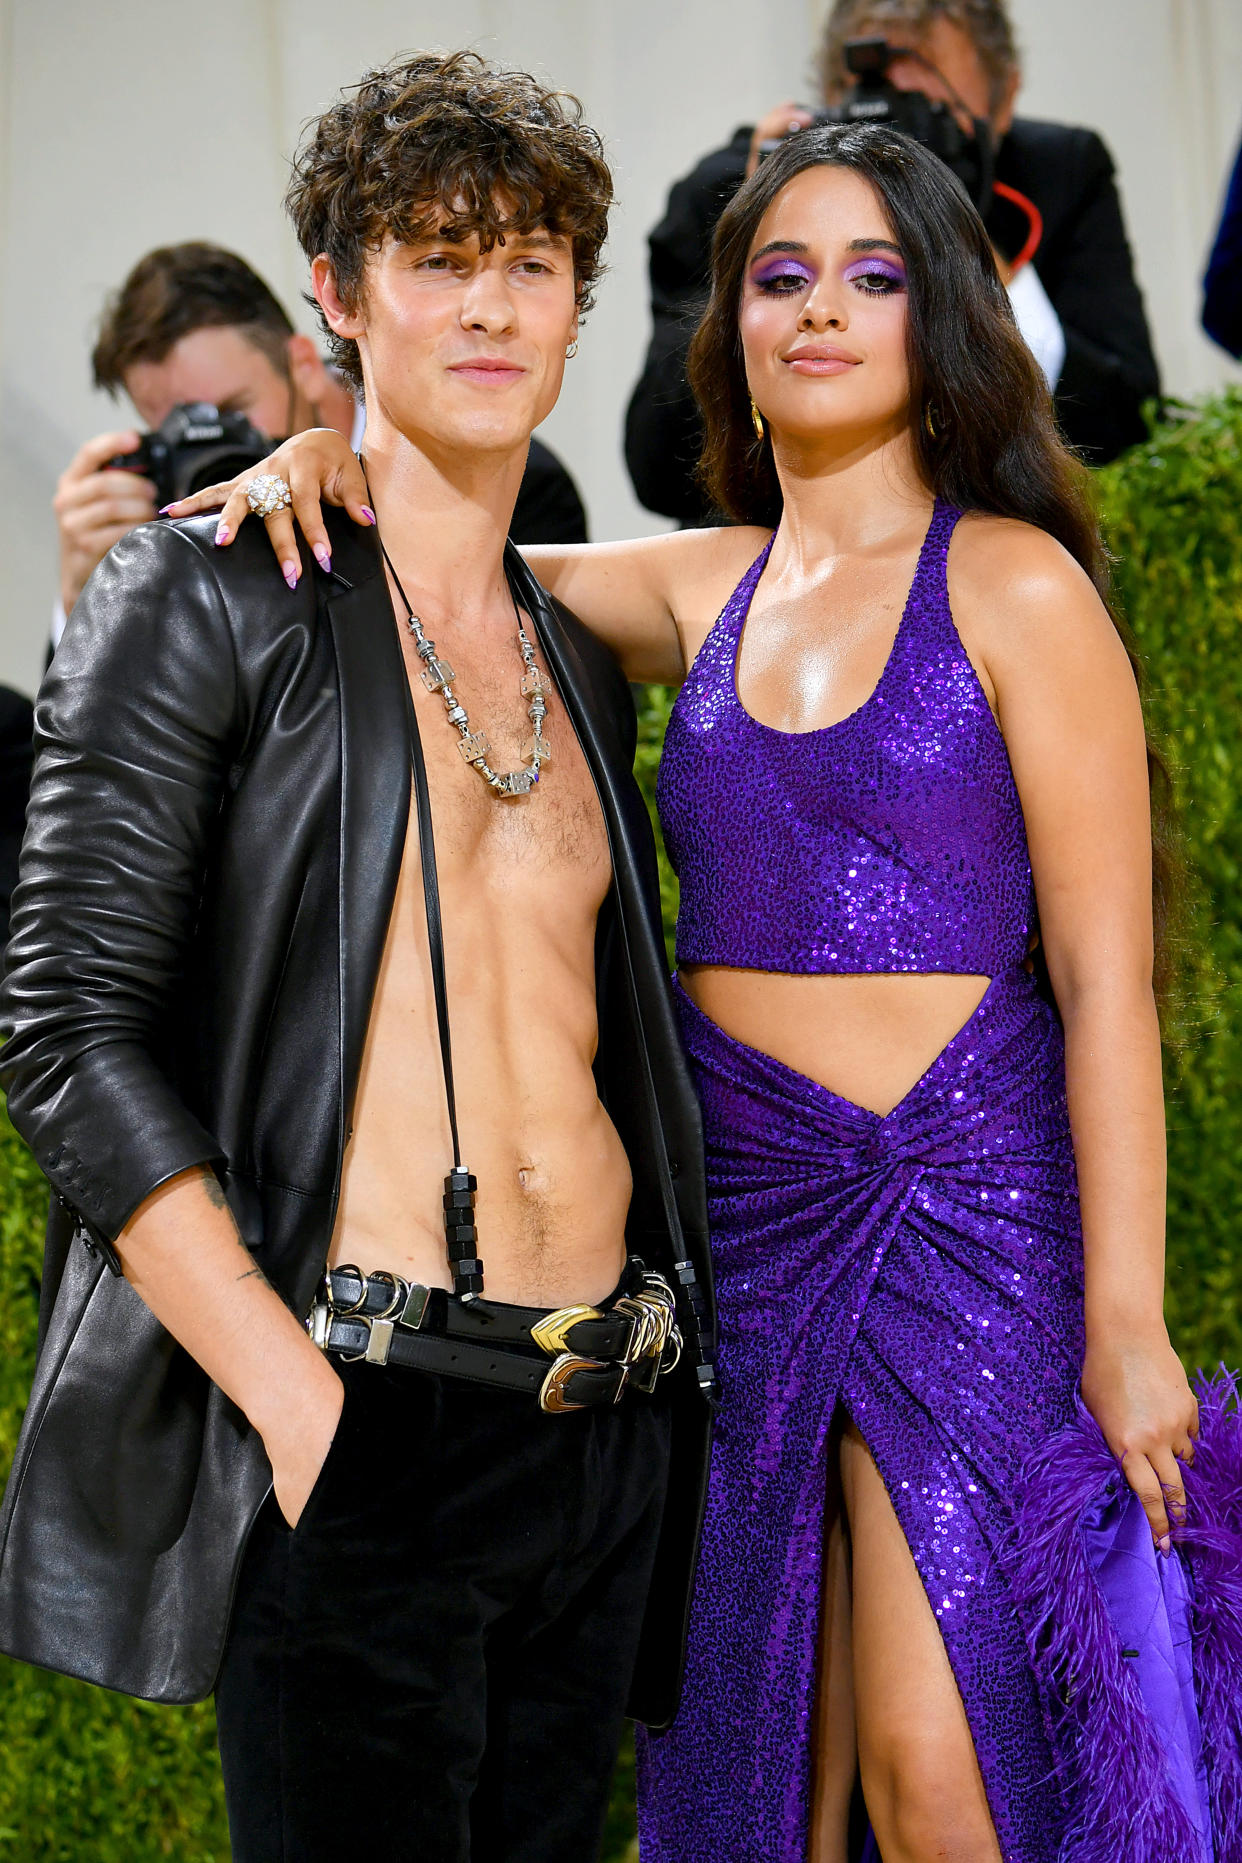 NEW YORK, NEW YORK - SEPTEMBER 13: Shawn Mendes and  Camila Cabello attend The 2021 Met Gala Celebrating In America: A Lexicon Of Fashion at Metropolitan Museum of Art on September 13, 2021 in New York City. (Photo by Jeff Kravitz/FilmMagic)